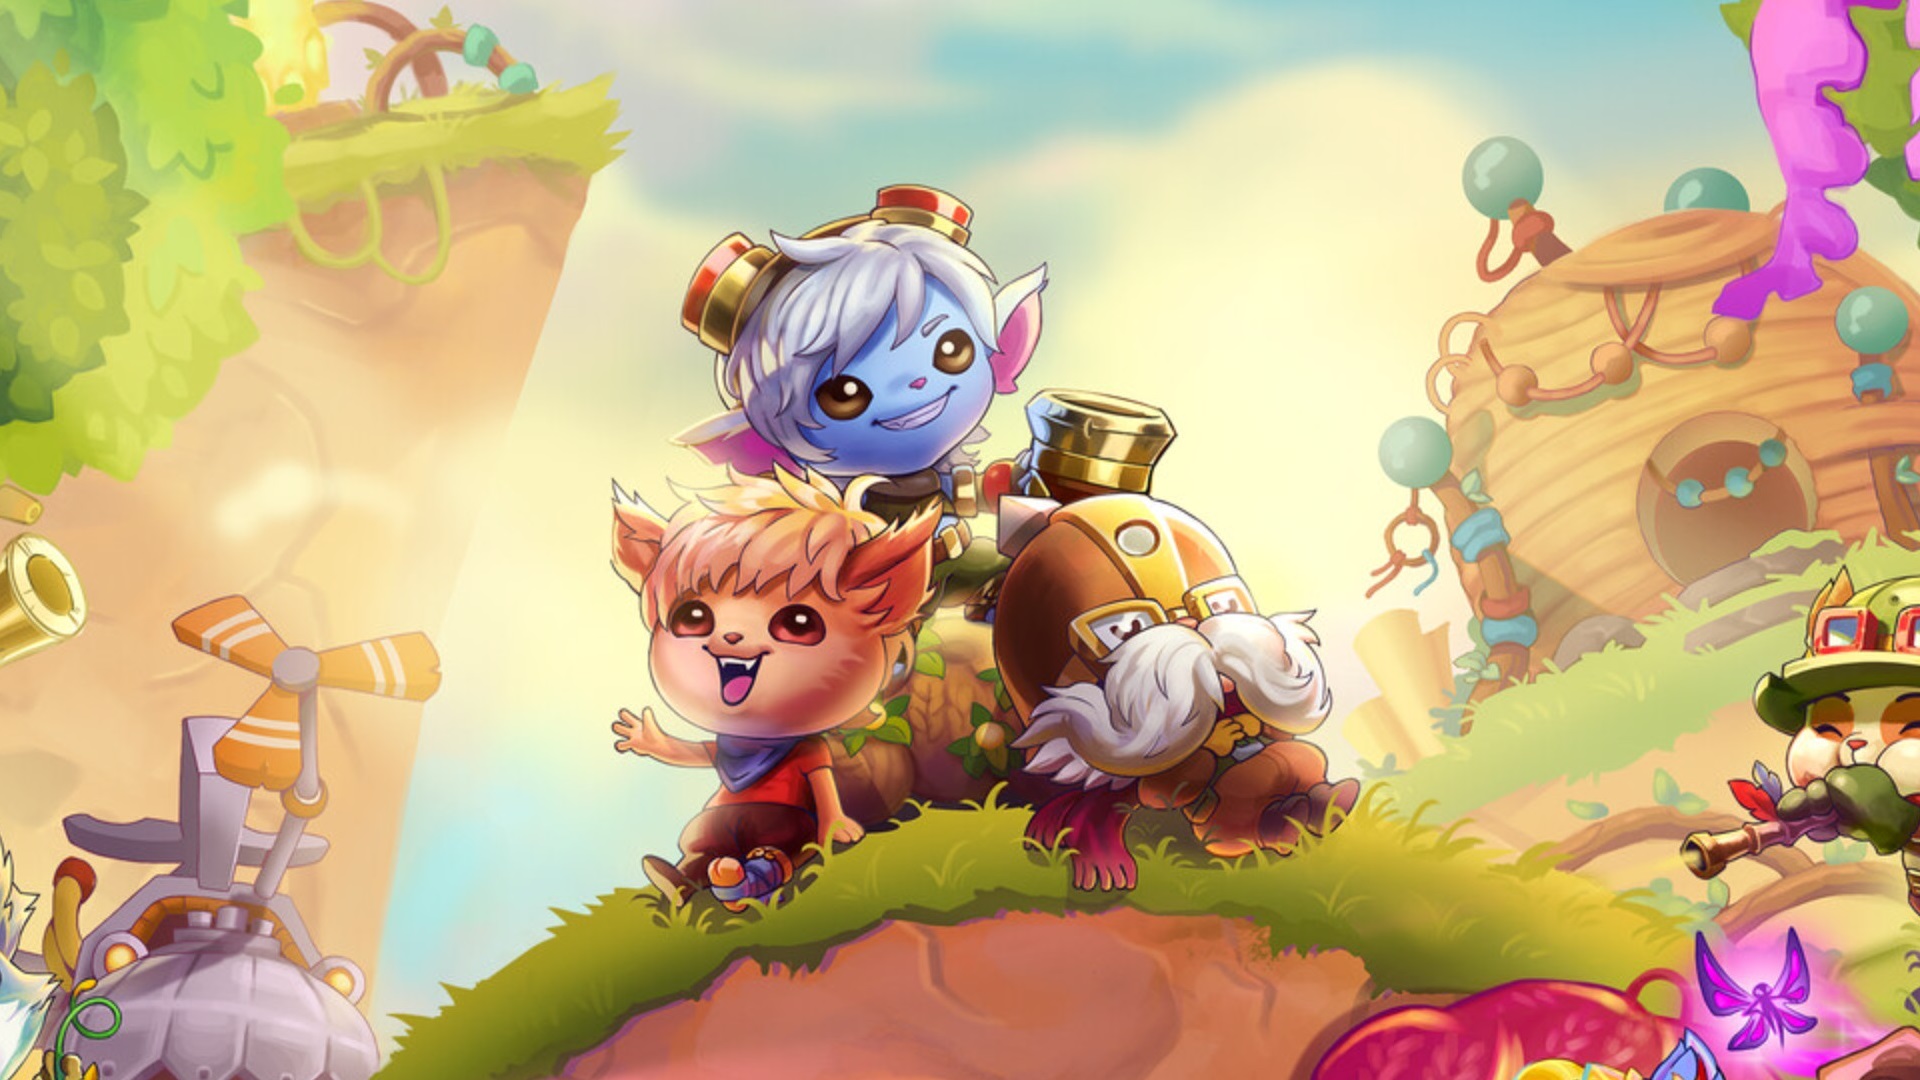 Ten years ago I wouldn’t have believed you if you told me League of Legends would one day have a bafflingly adorable ‘crafting RPG’ spinoff